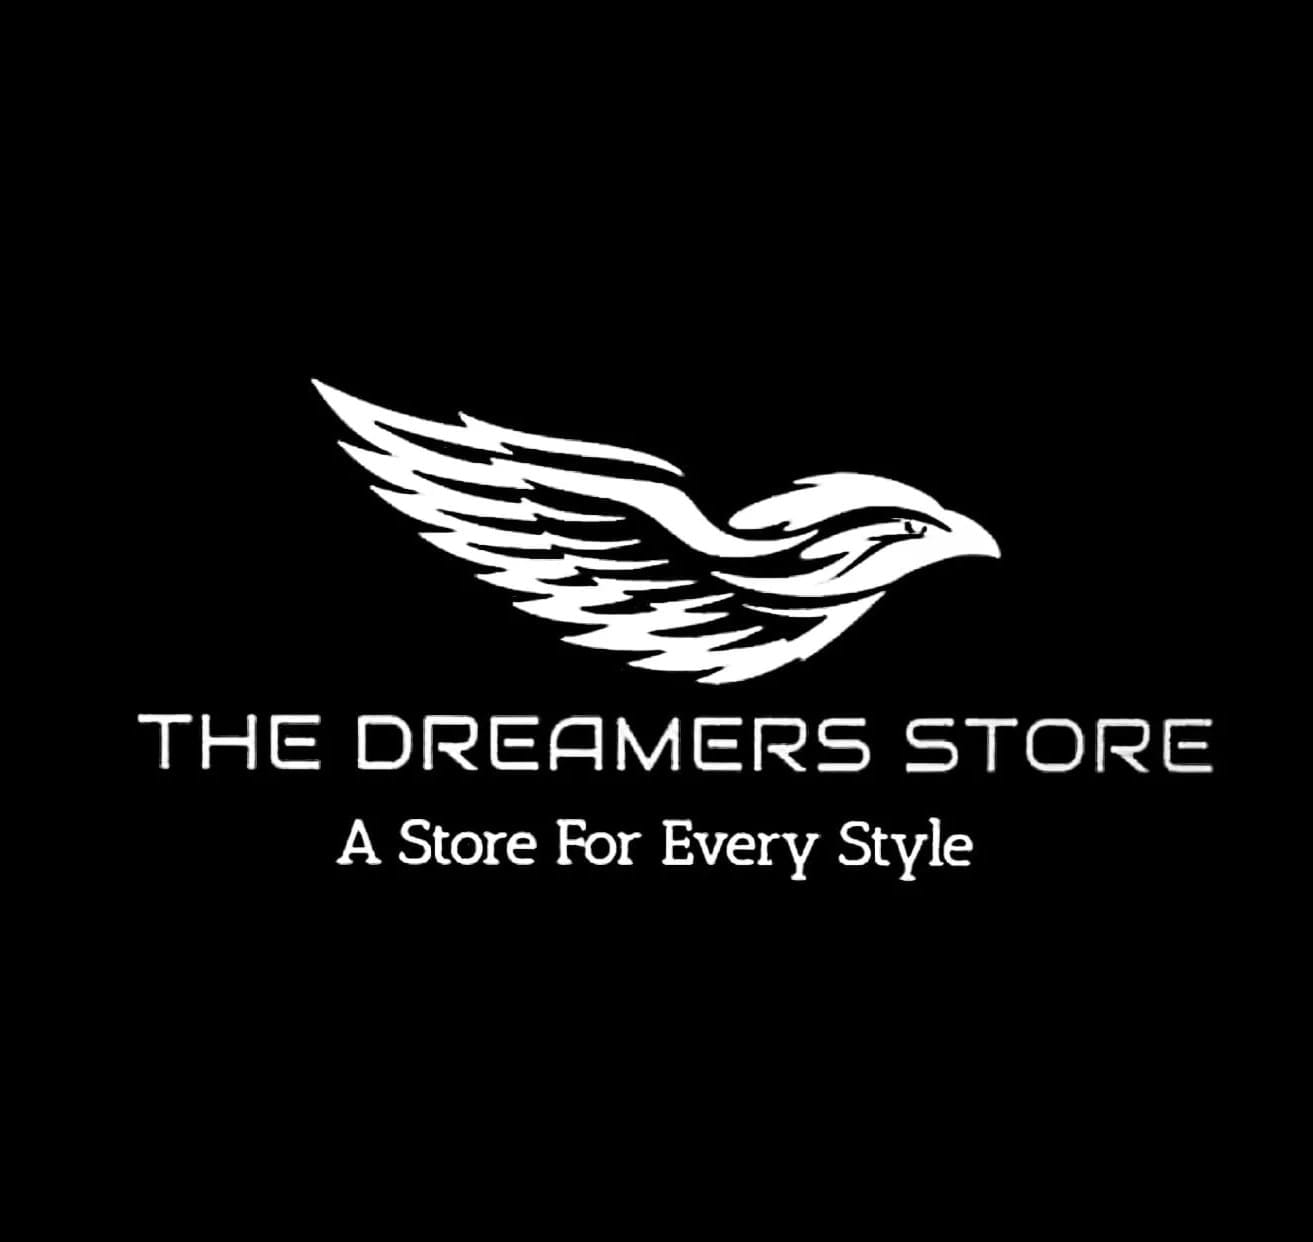 The Dreamers Store